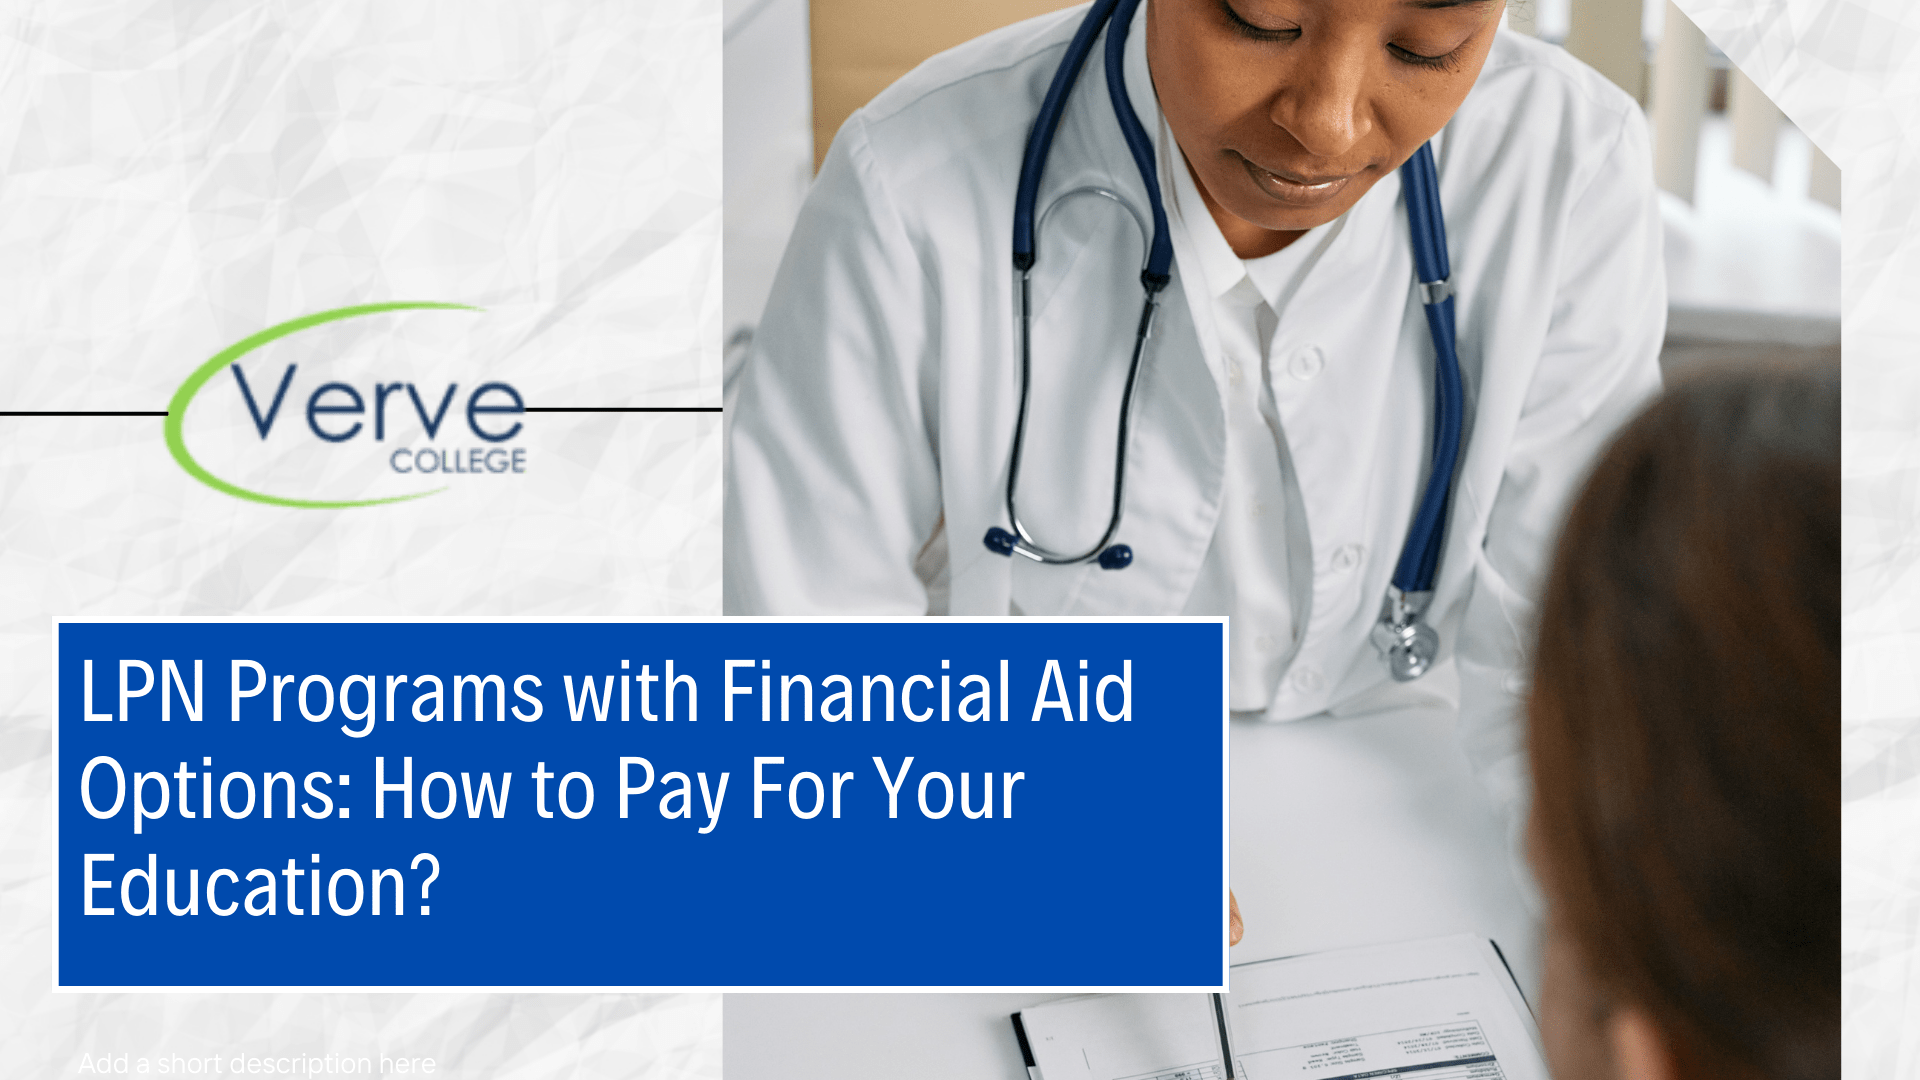 LPN Programs with Financial Aid Options How to Pay For Your Education